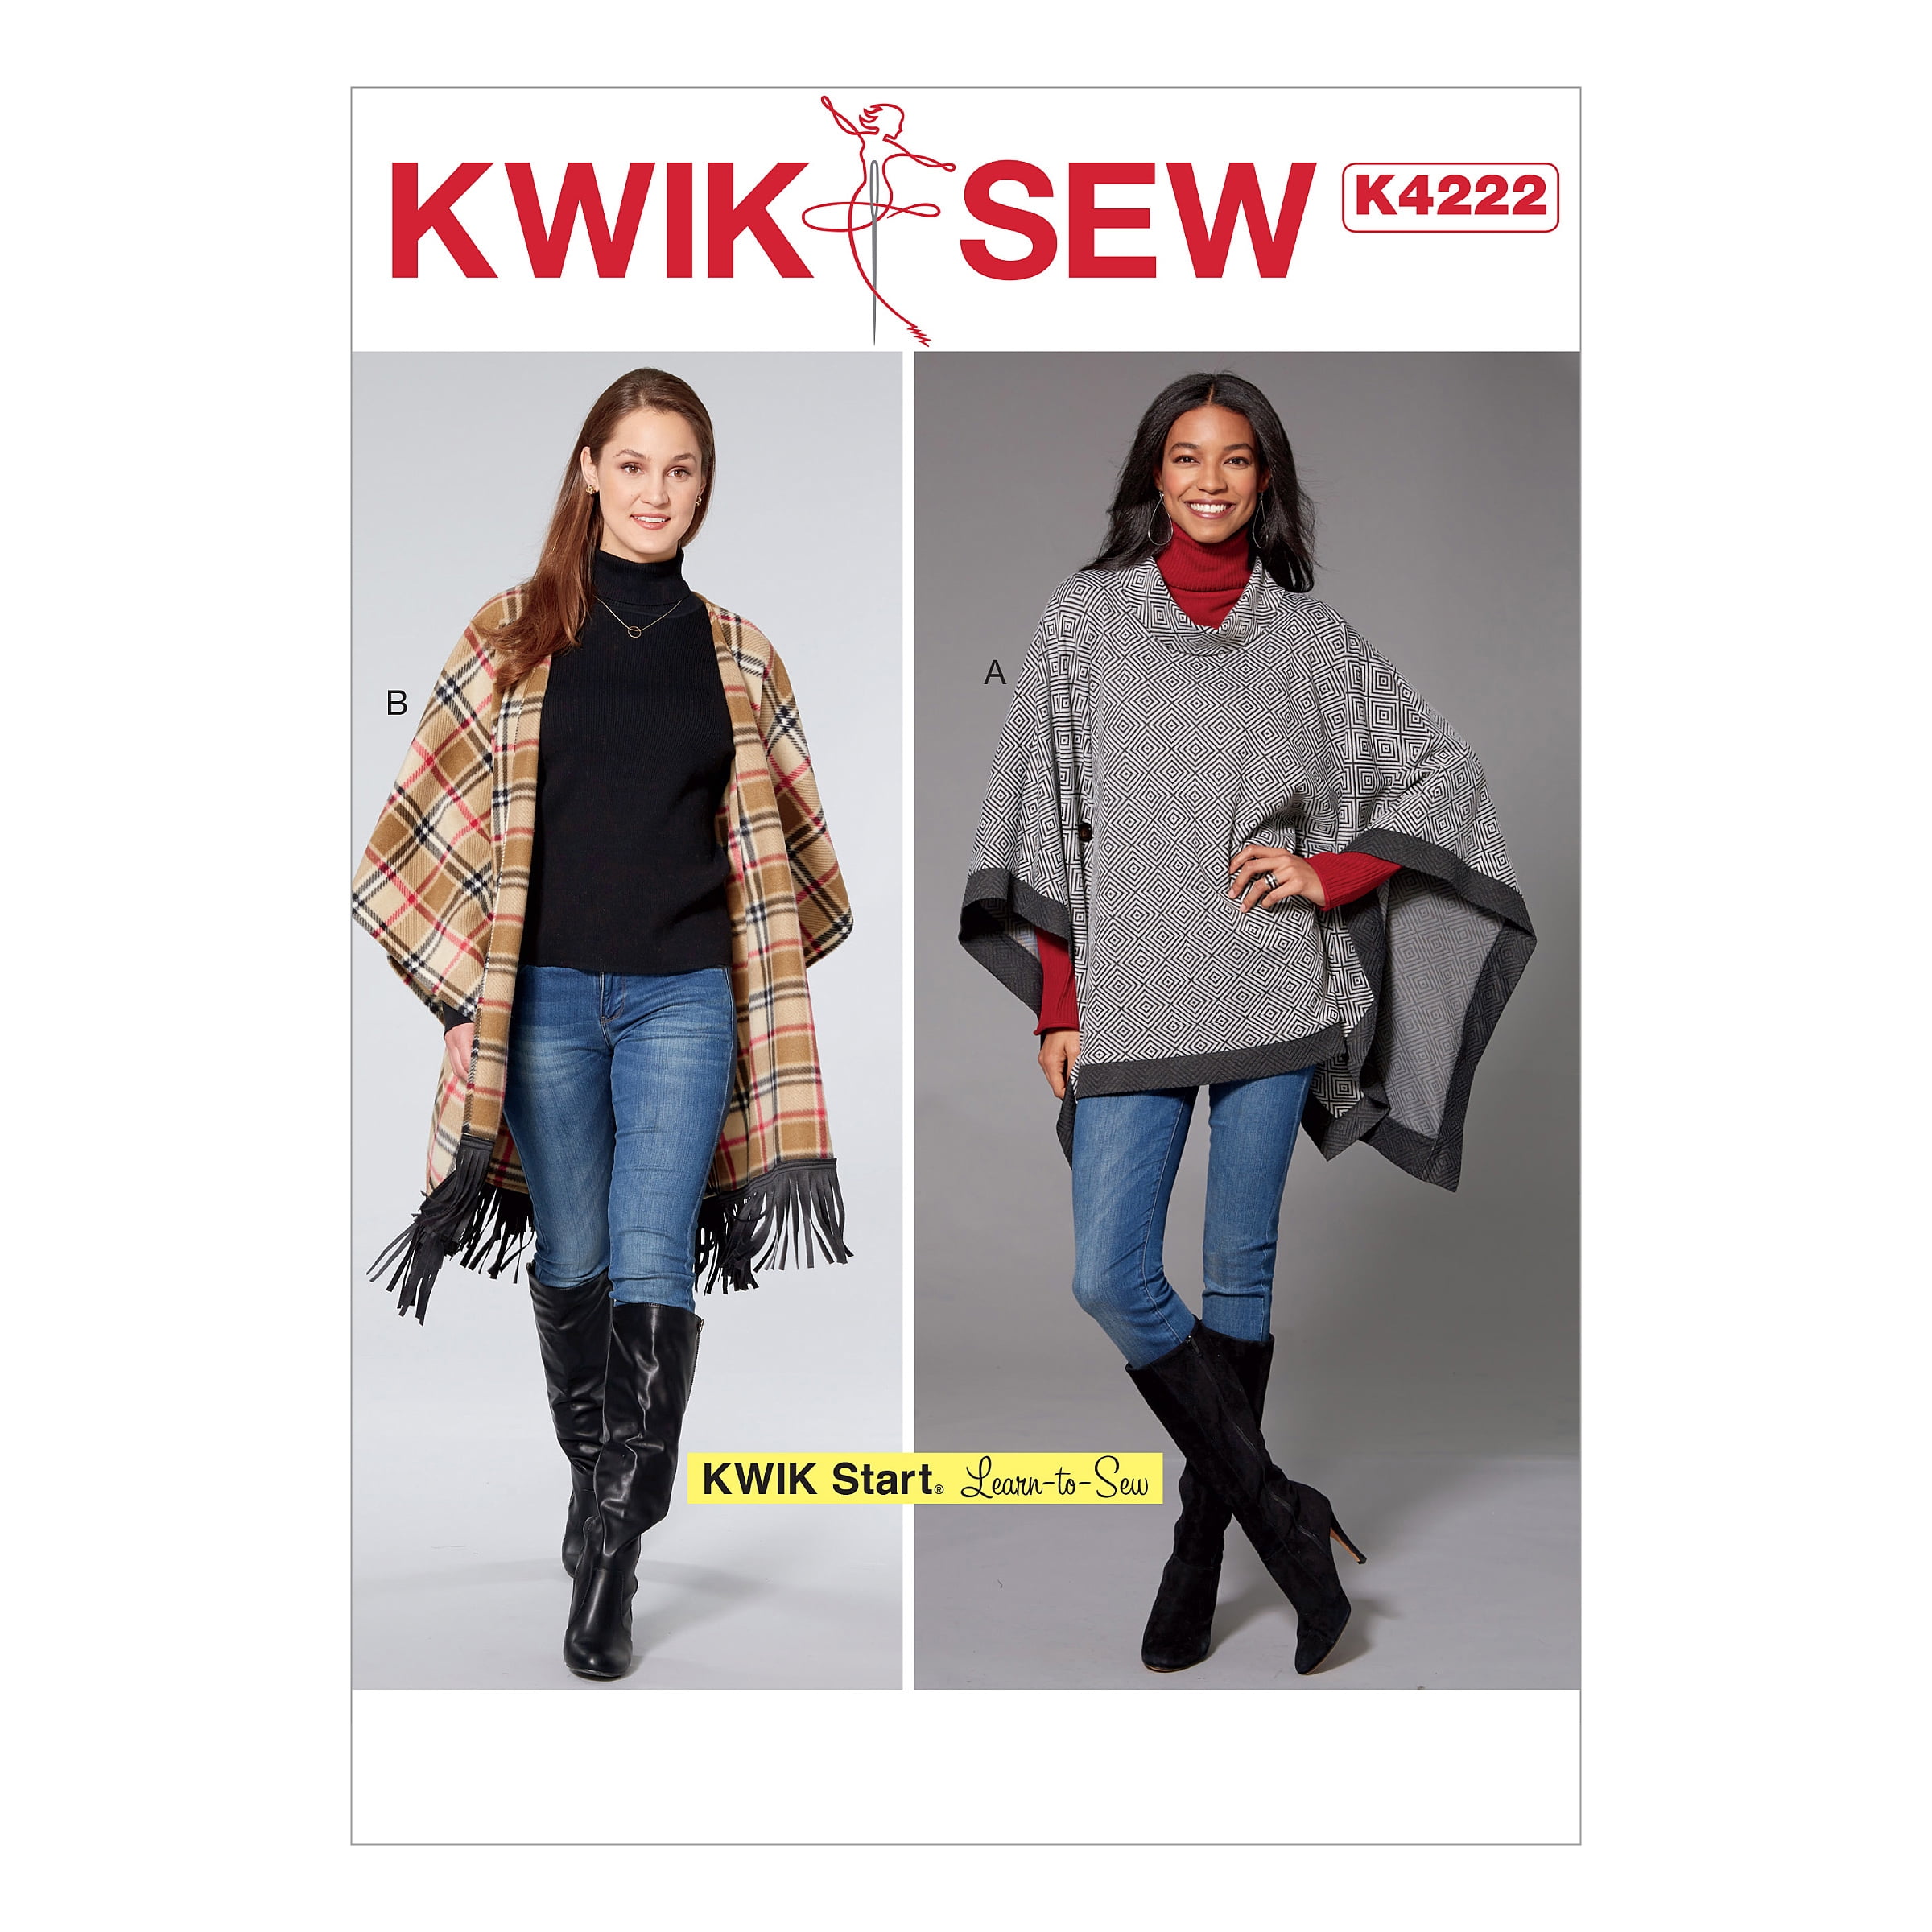 Kwik Sew Sewing Pattern Misses' Ponchos With Button Detail-Xs-S-M-L-Xl 